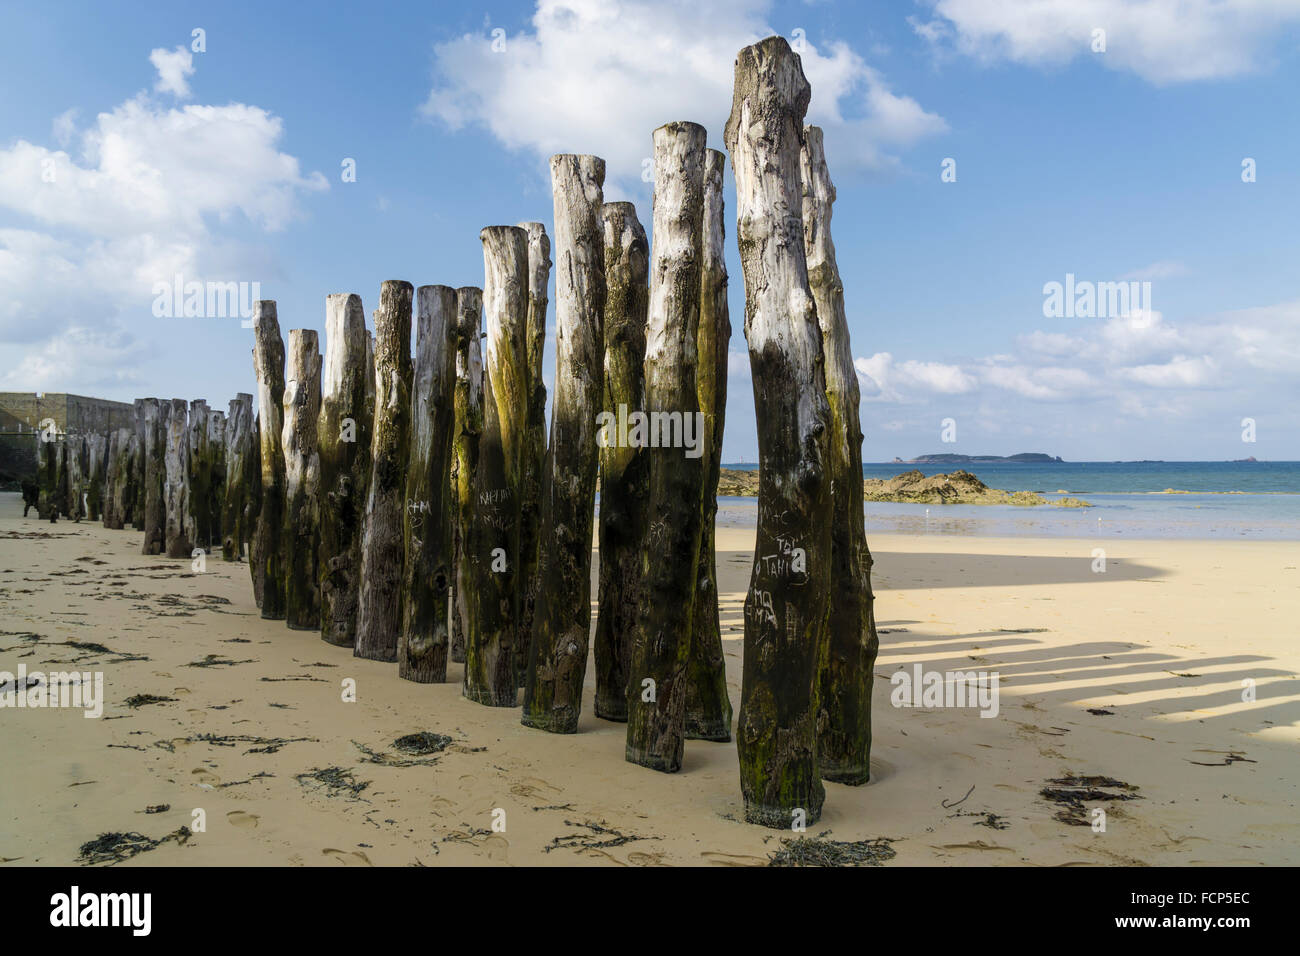 Groynes on the beach at St Malo, Brittany, France Stock Photo